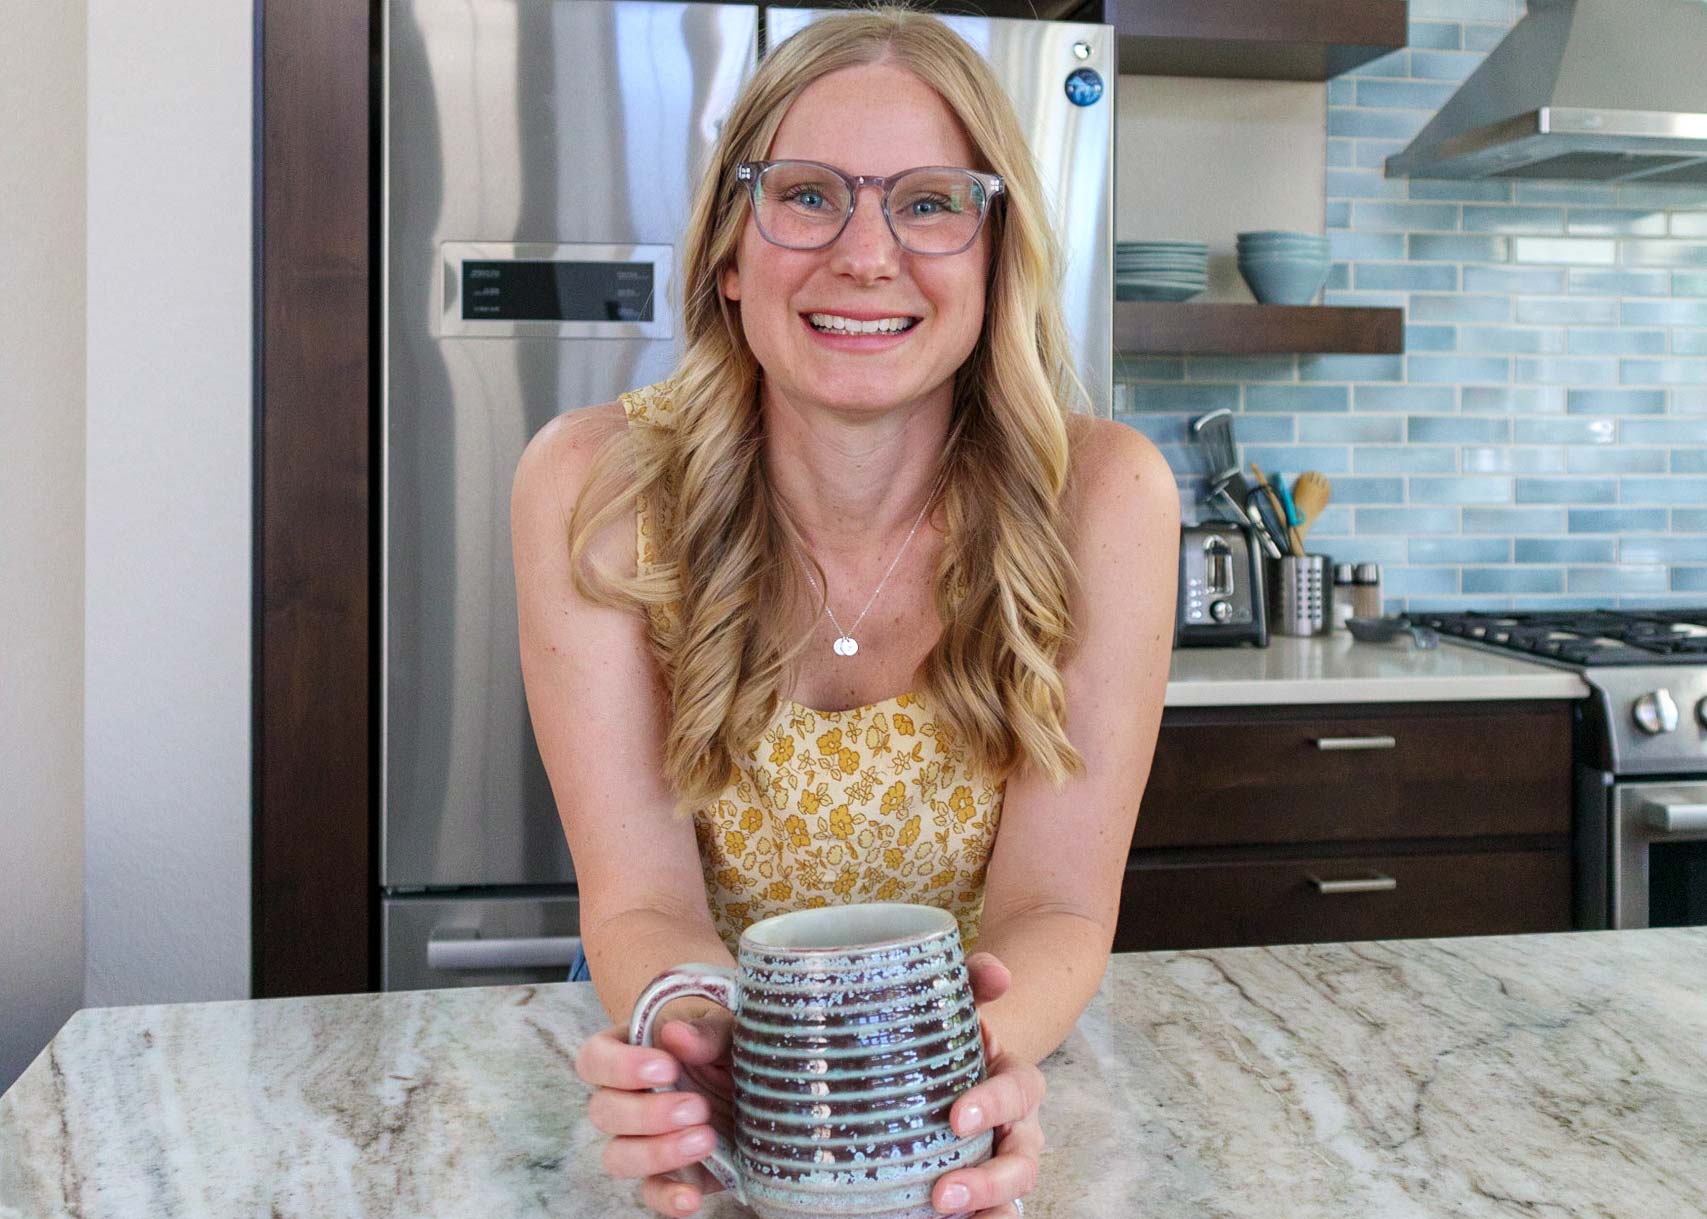 Alison Percowycz, MSN, FNP-C smiling with a ceramic mug in her hand and a kitchen in the background